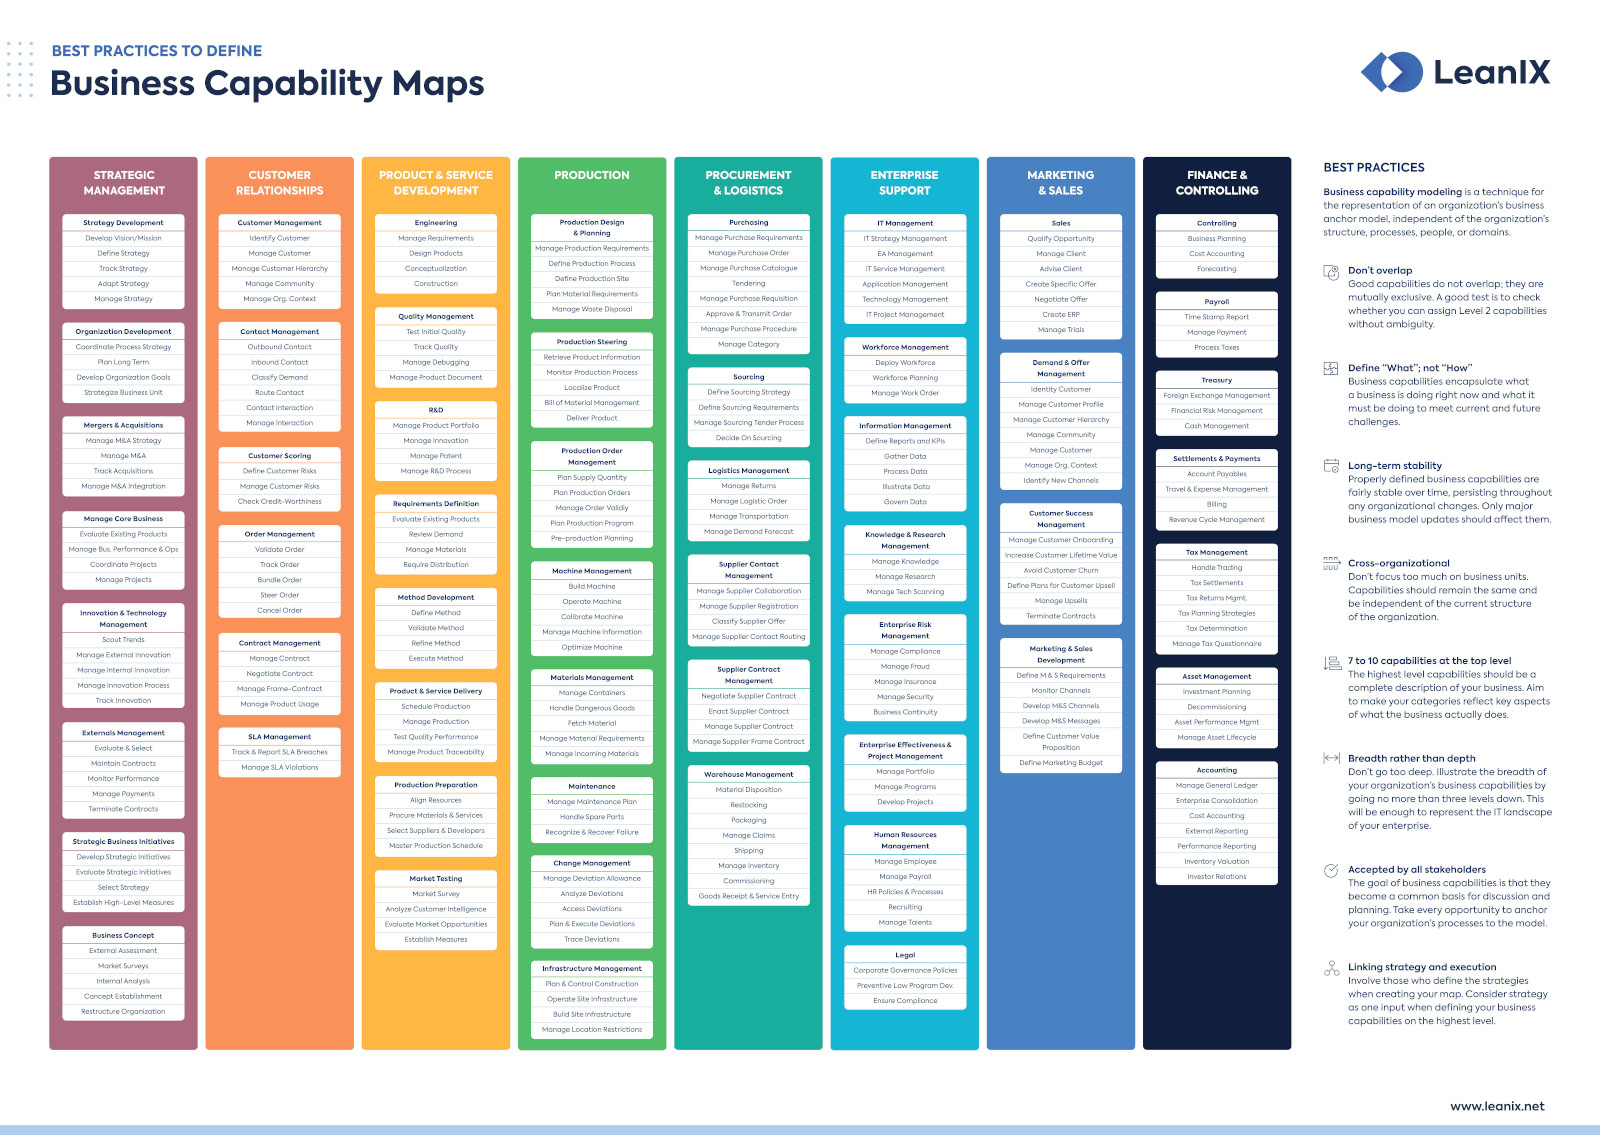 A poster showing how to create the perfect business capability map for your organization.